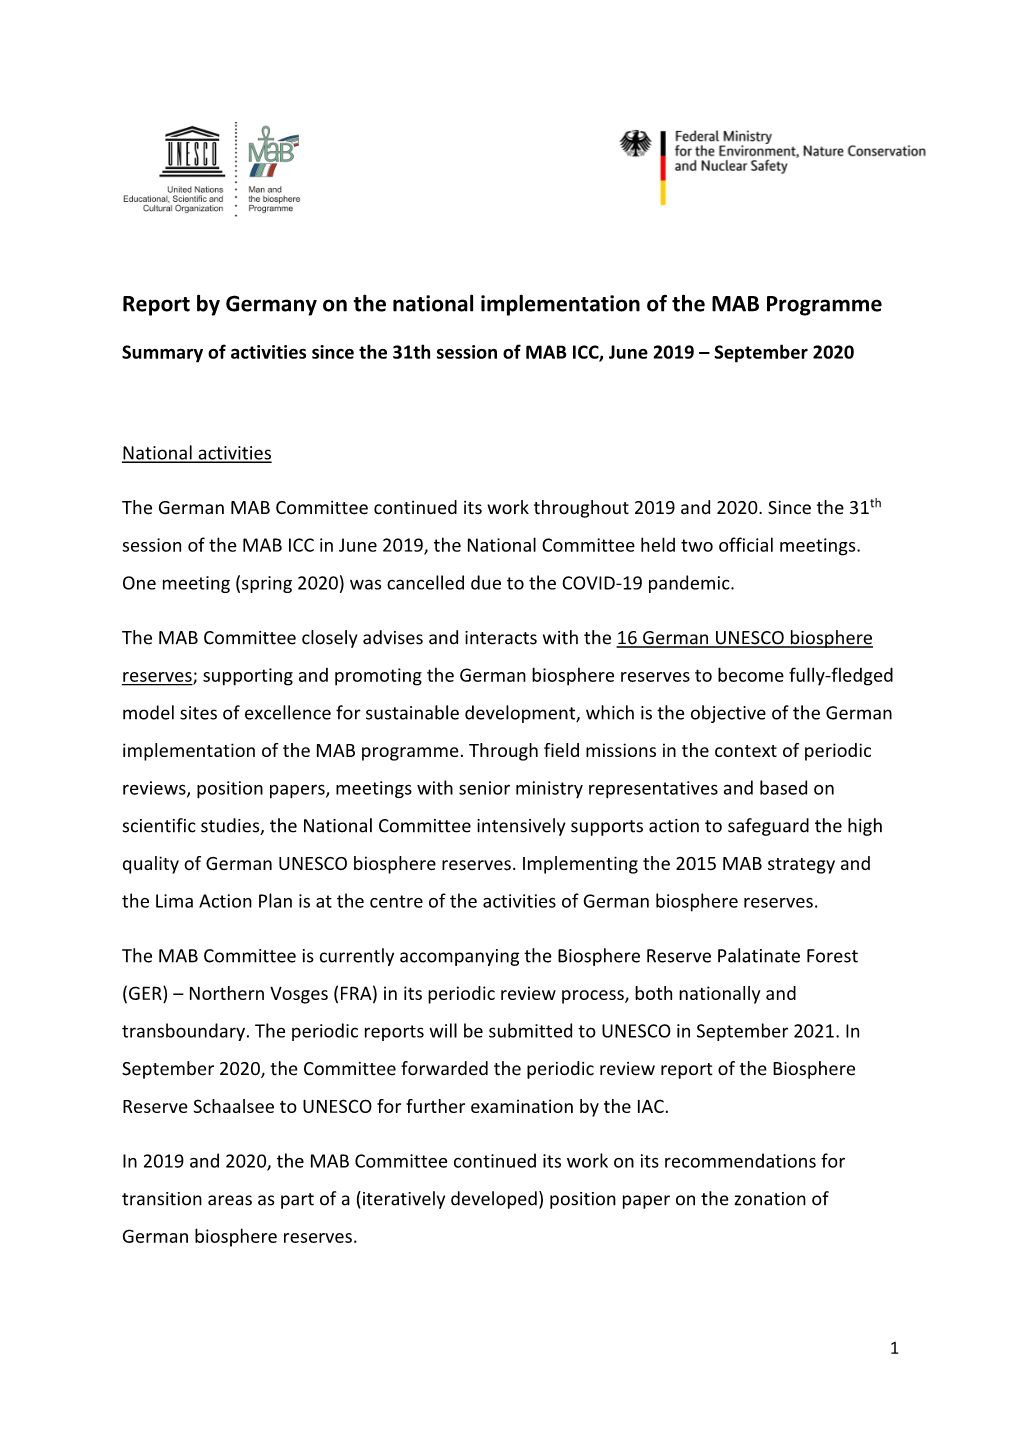 Report by Germany on the National Implementation of the MAB Programme